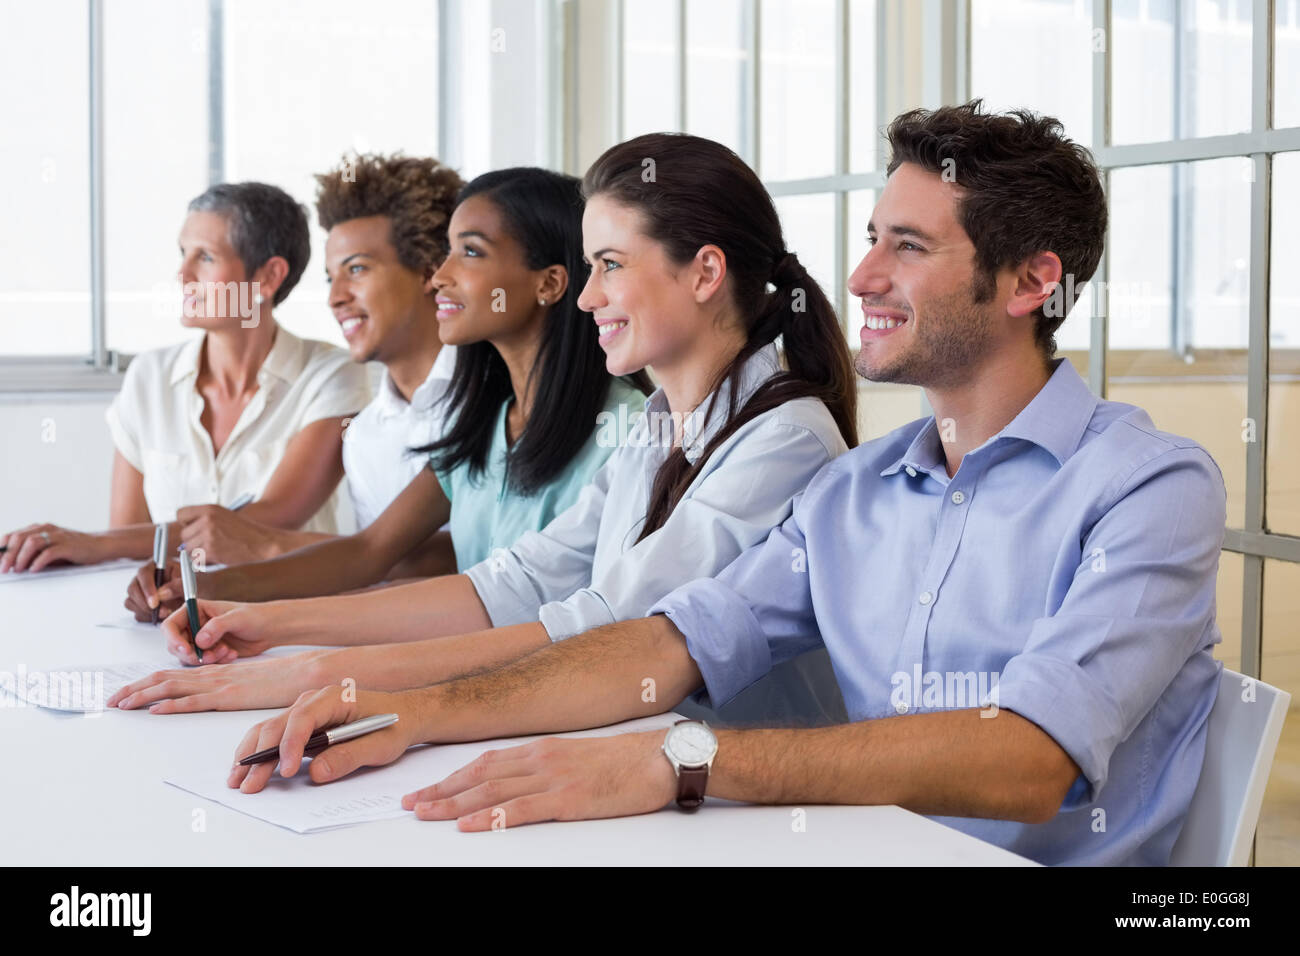 Business people attentive at presentation Stock Photo